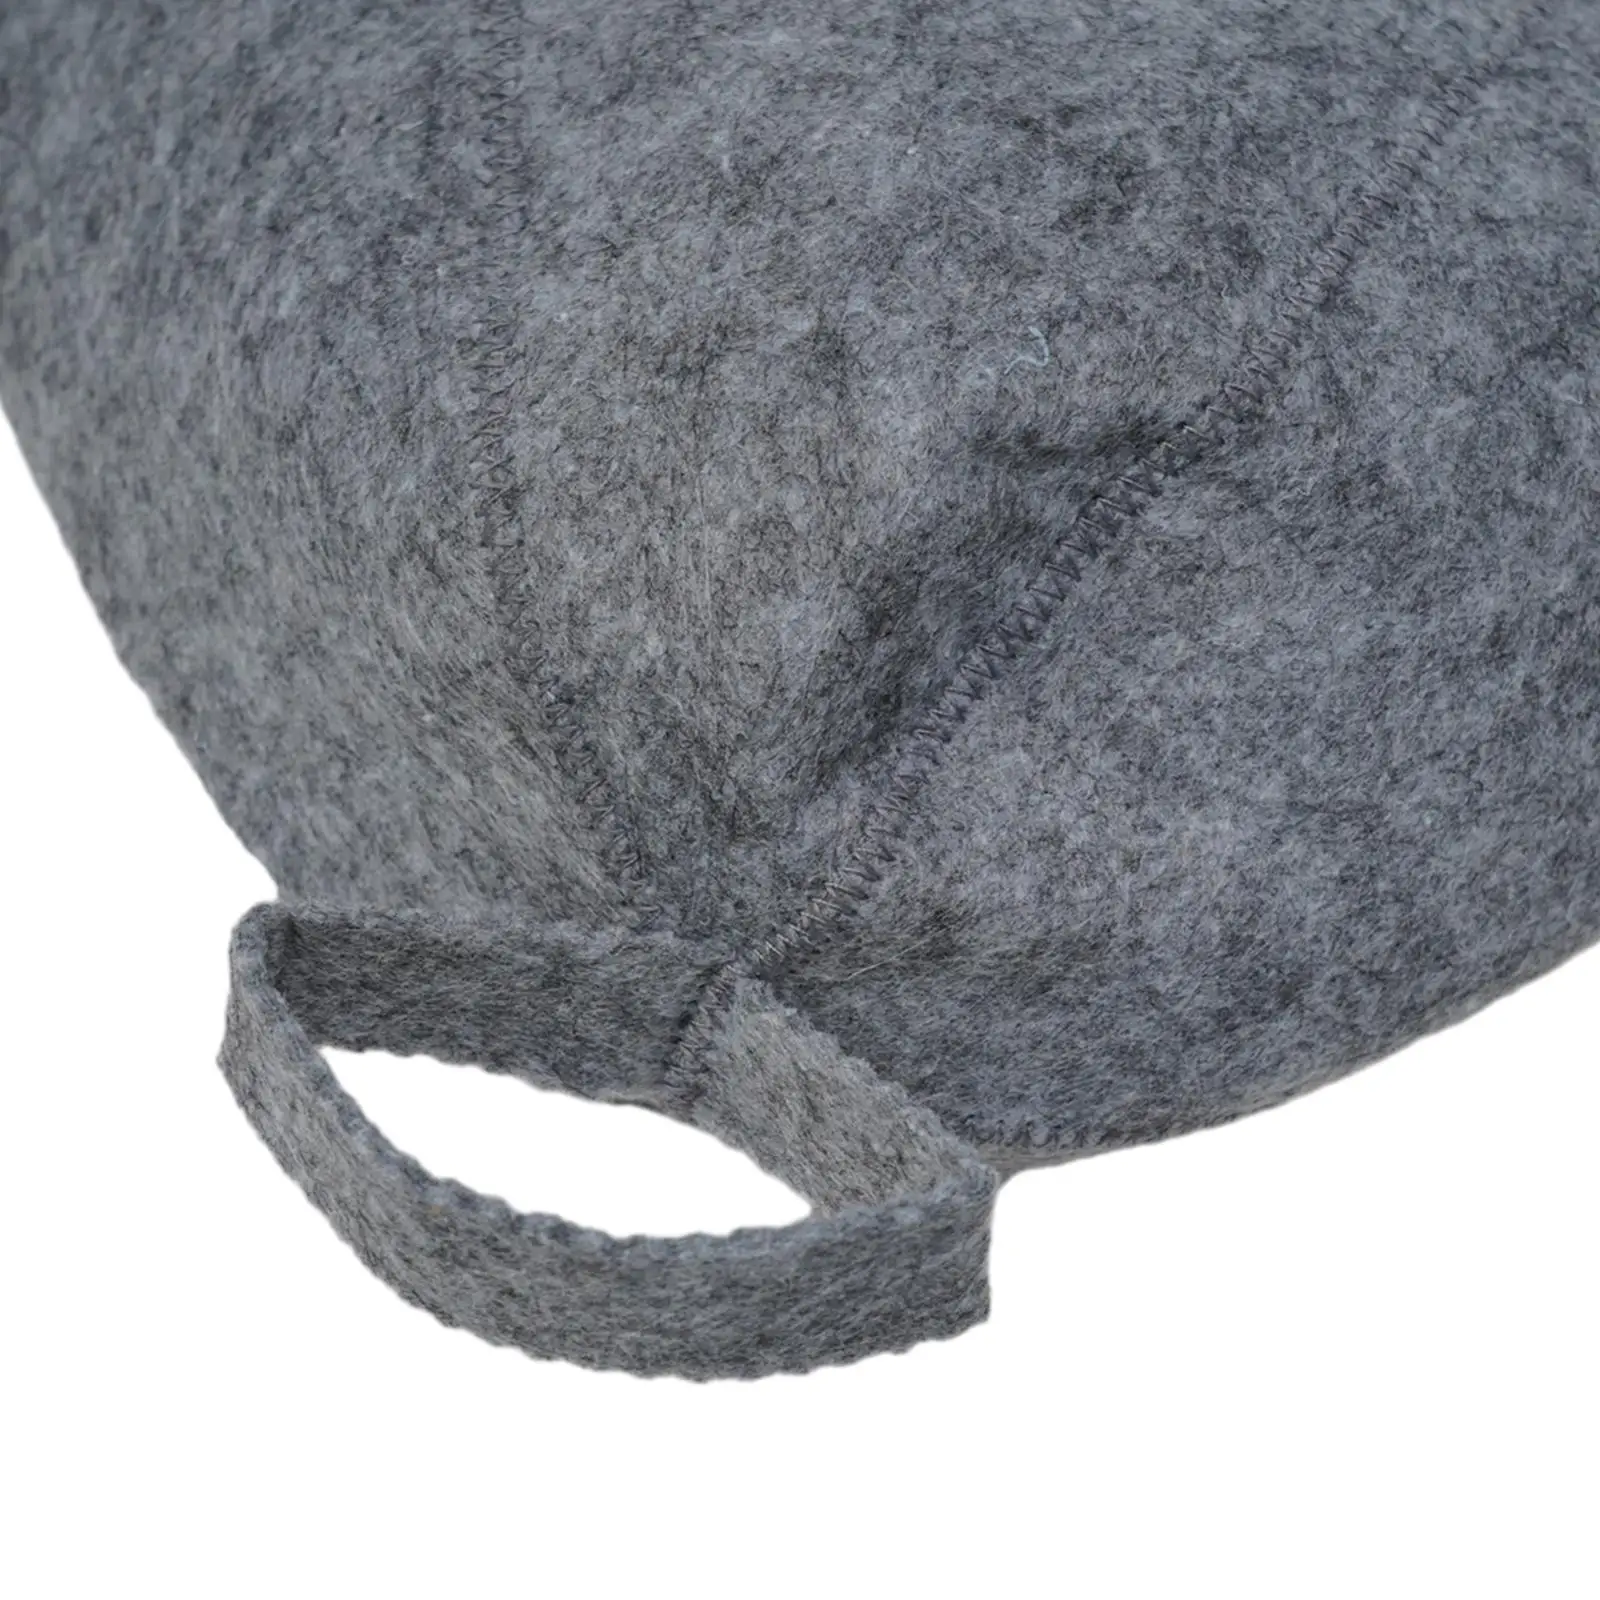 High Quality Practical Brand New Sauna Hat Wool Cap Anti Heat Protection Soft Solid Spa Bath With Hanging Loop